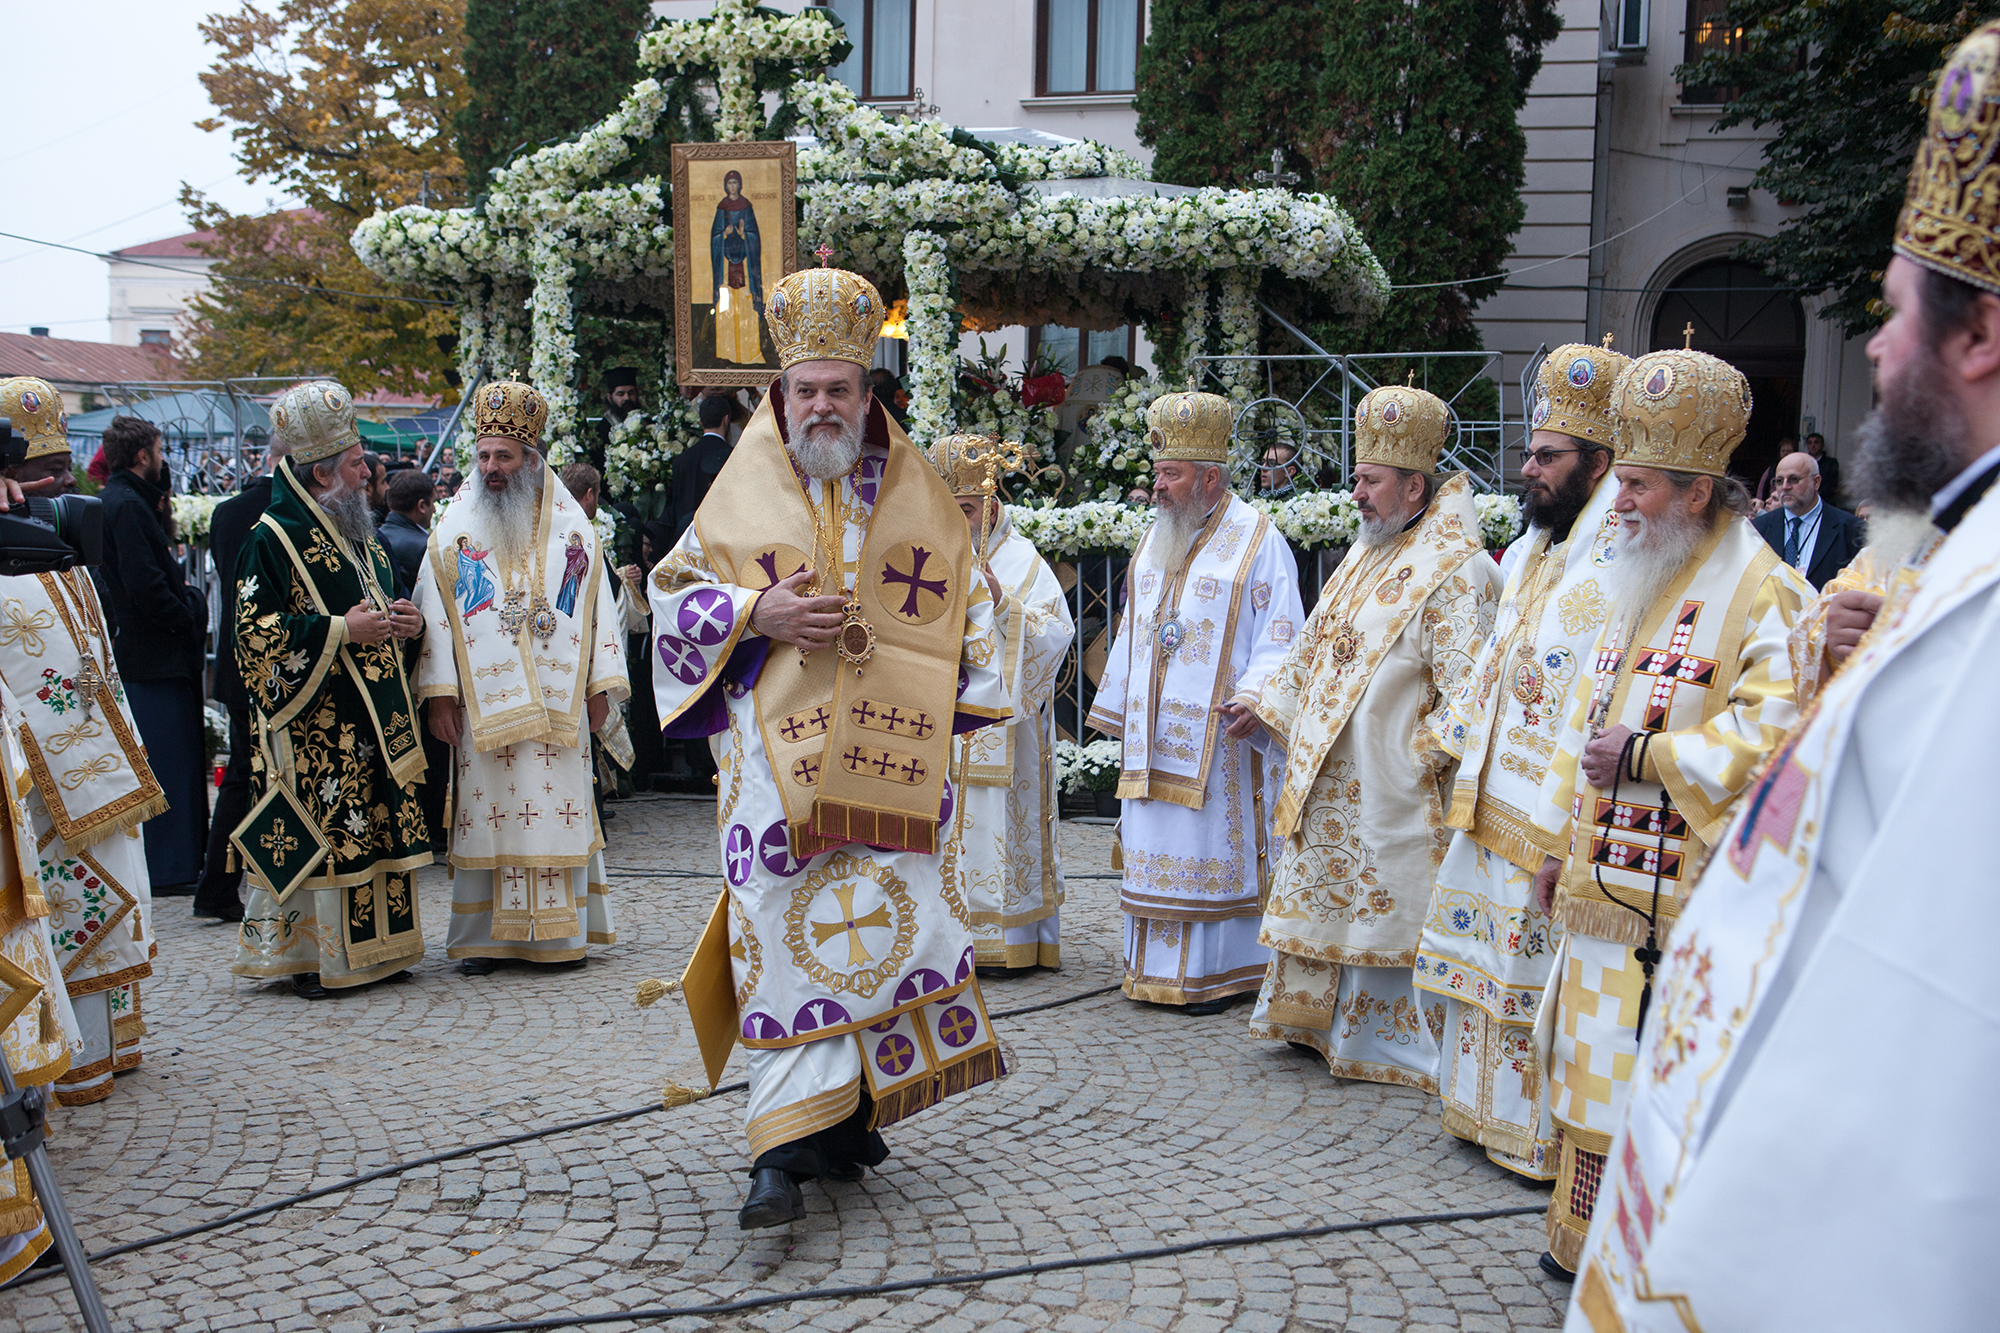 High priests of Romanian Orthodox Church gather at the relics of Saint Parascheva, in Iasi, October 14, 2013. She is considered the Patron Saint and Protector of Moldavia and each year, on October the 14th, on the Saint’s Day, hundreds of thousands of people from all over the county and abroad come on a pilgrimage.